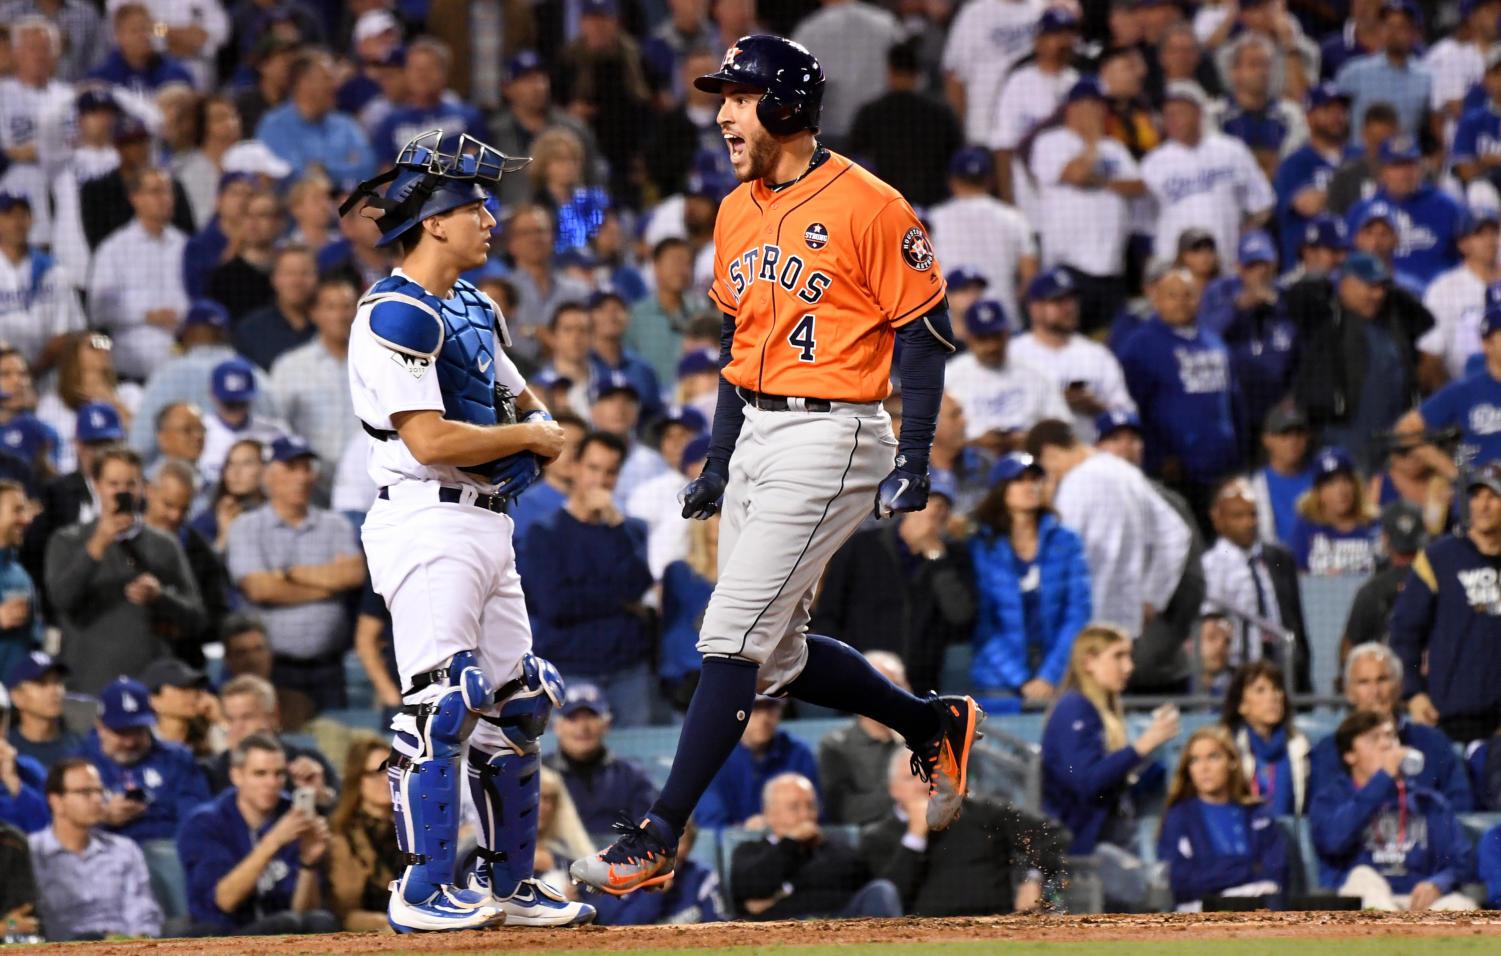 The Houston Astros' George Springer (4) celebrates his two-run home run in front of Los Angeles Dodgers catcher Austin Barnes in the second inning during Game 7 of the World Series at Dodger Stadium in Los Angeles on Wednesday, Nov. 1, 2017.